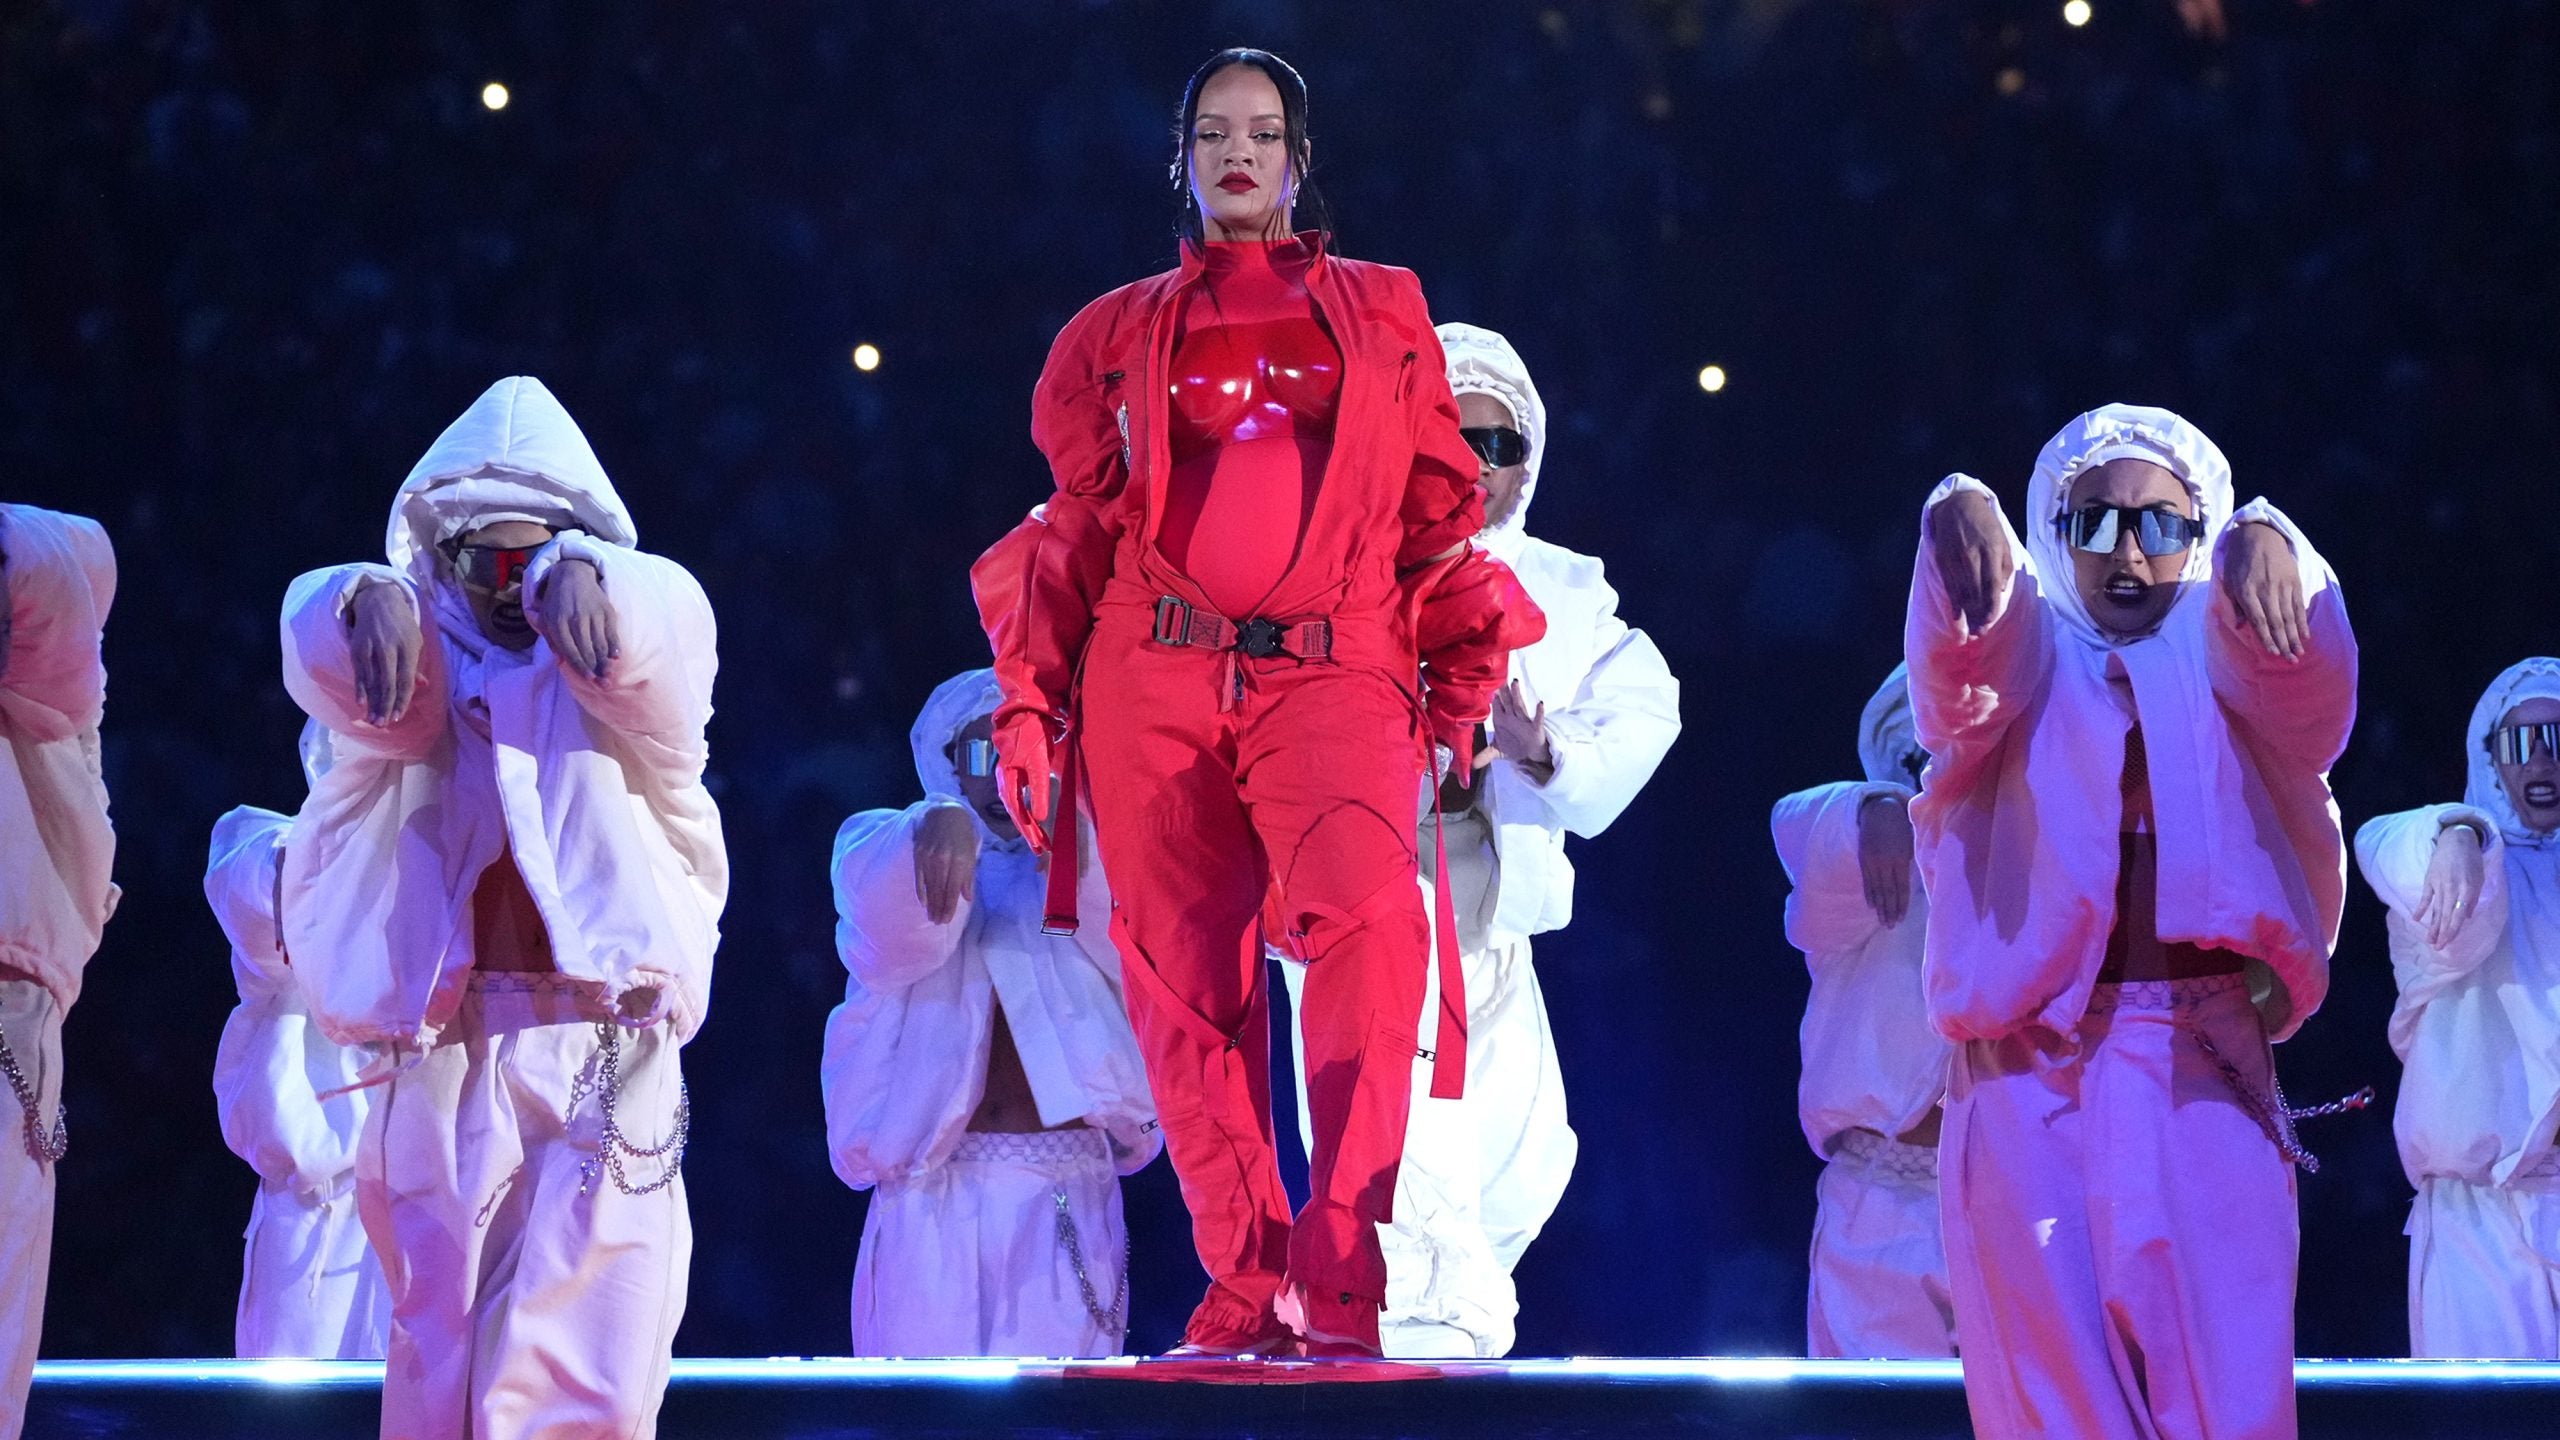 Rihanna’s Super Bowl Performance Proves Pregnancy Can’t Stop Any Woman’s Show